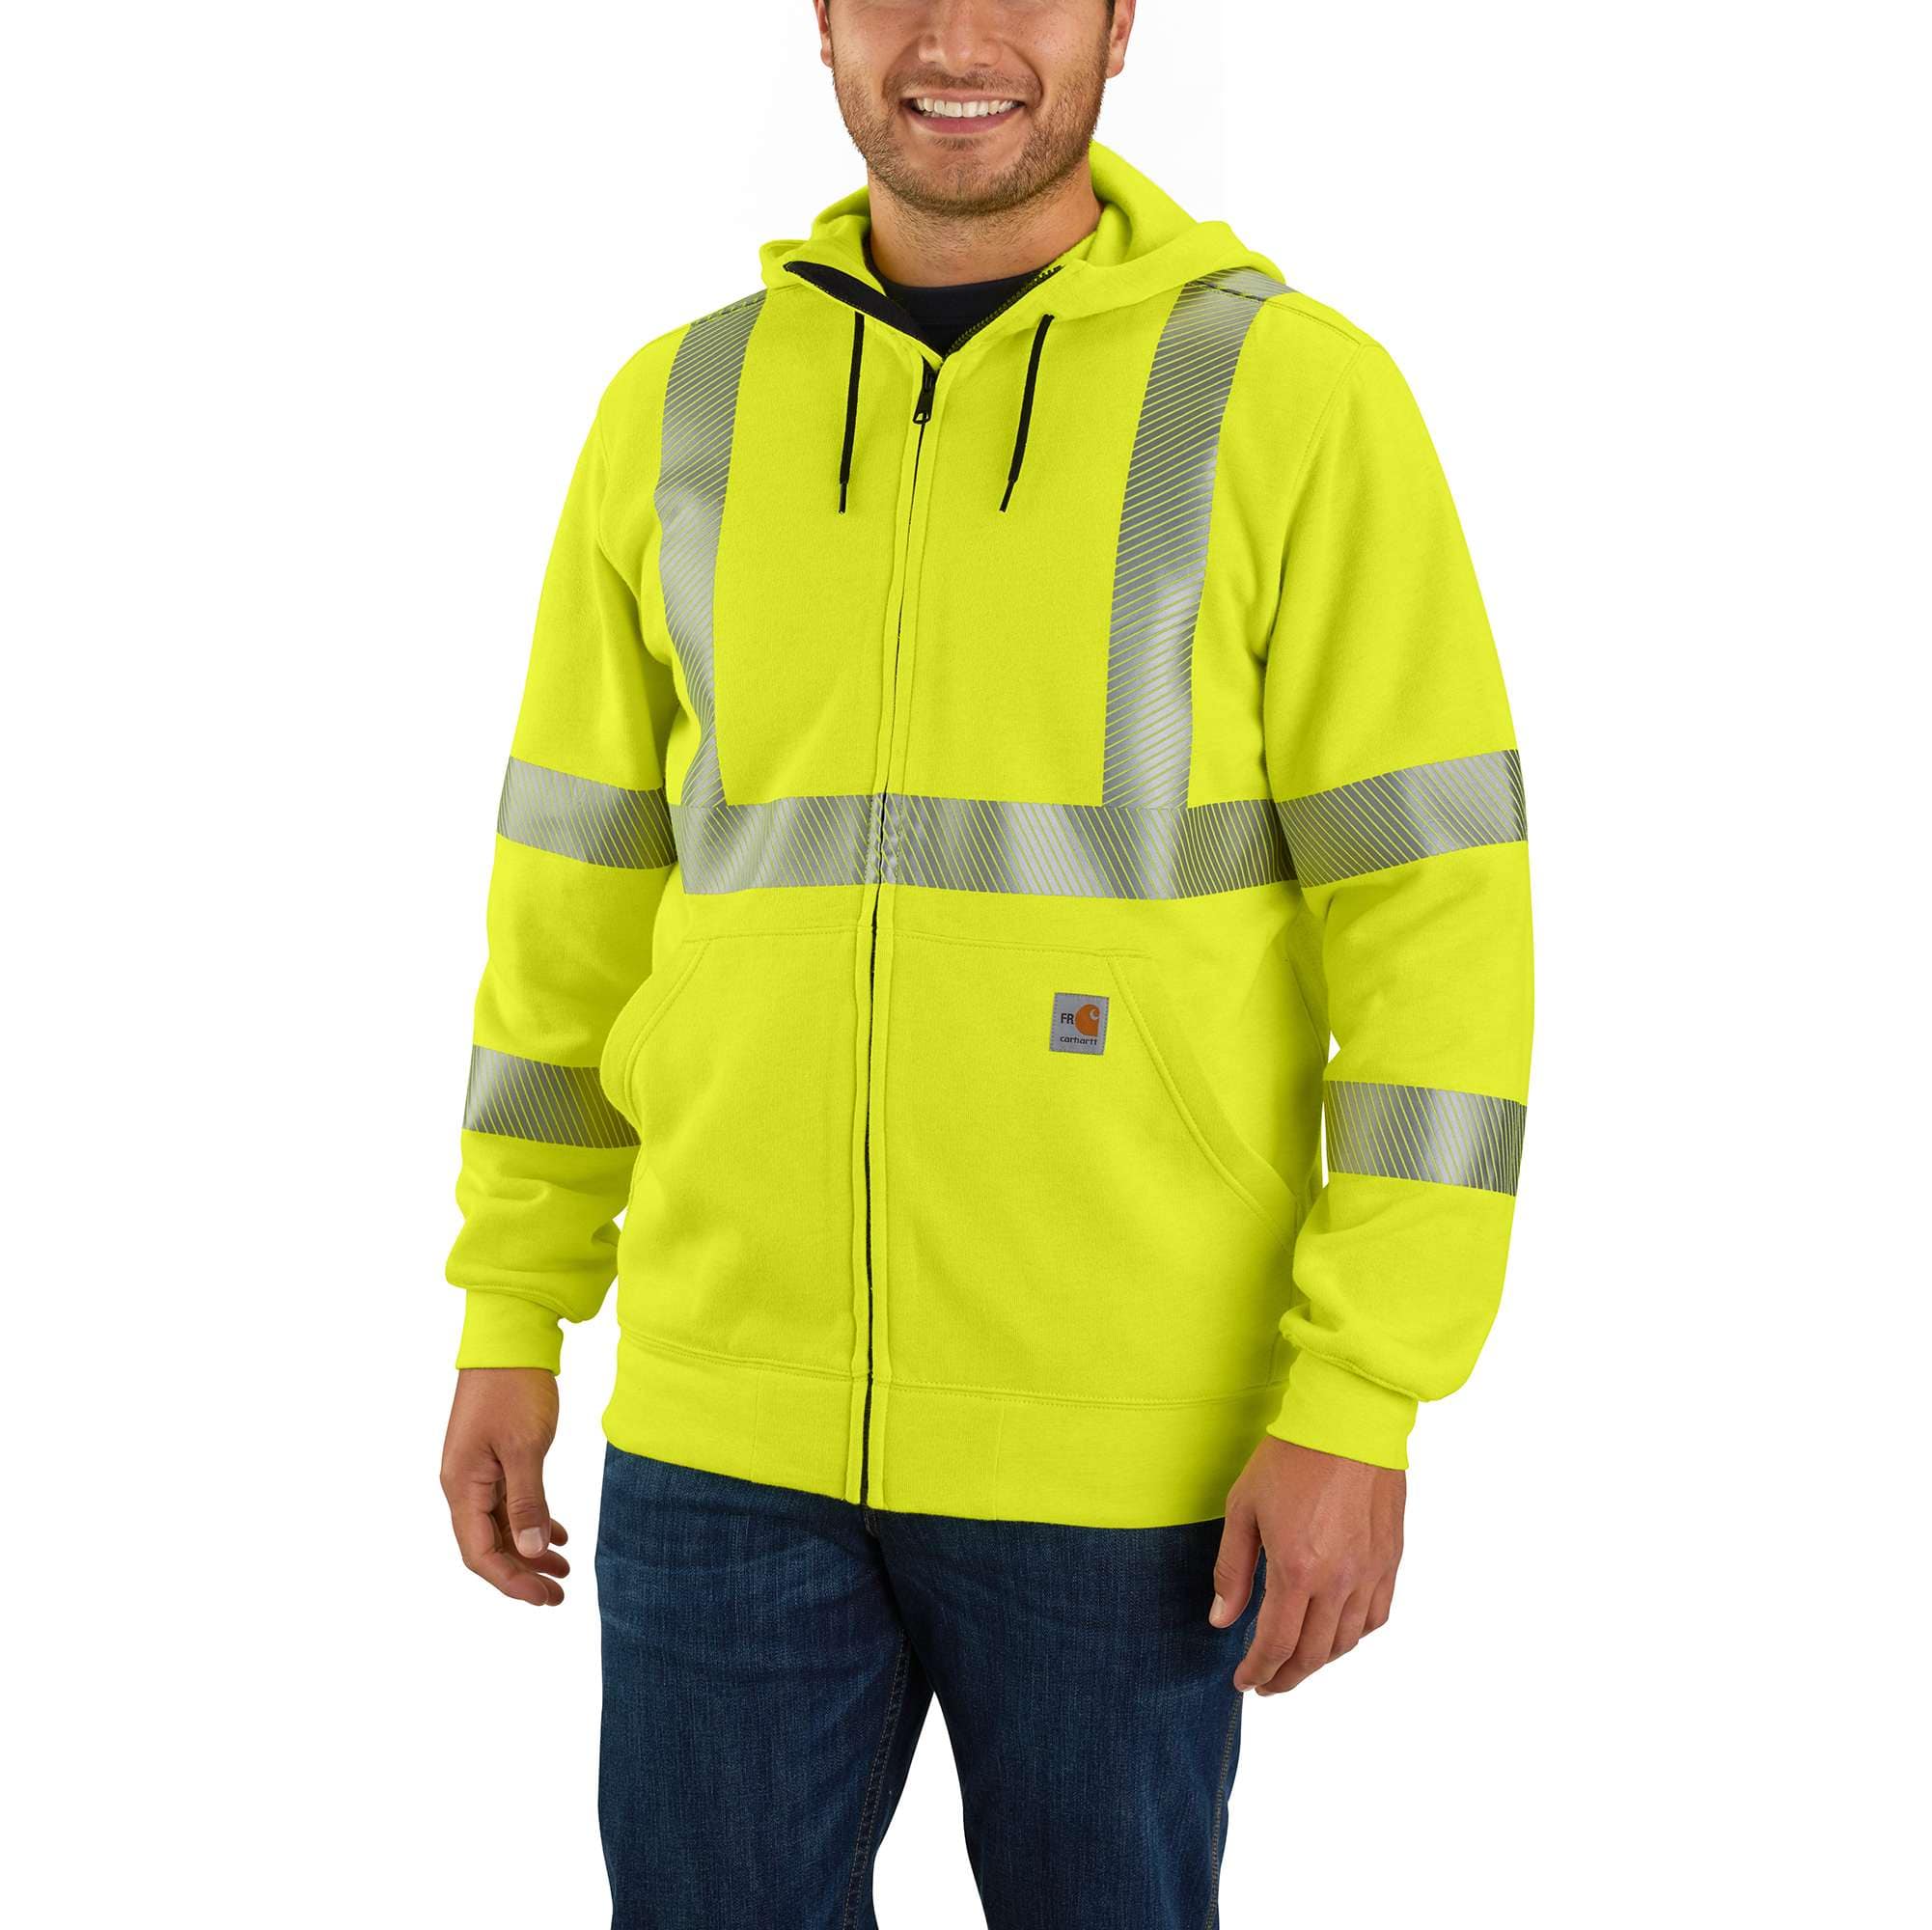 Carhartt Men's Brite Lime Flame Resistant High-Visibility Force Loose Fit Midweight Full-Zip Class 3 Sweatshirt